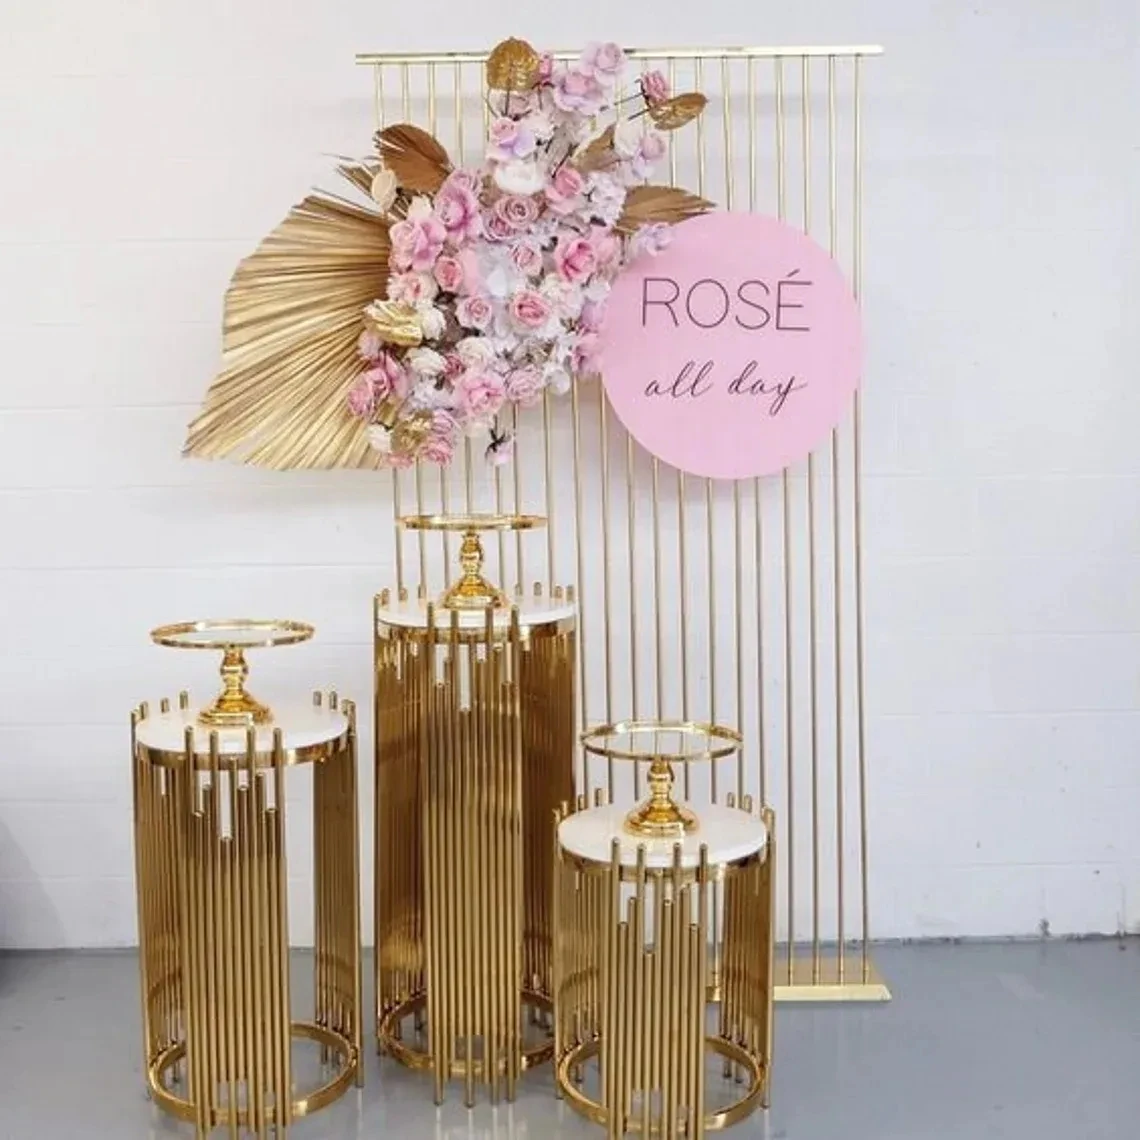 

Tall-Event Party Backdrop, Pedestal Stand, Flower Balloon Arch, Plinth Table, Cylinder Cake Holder, Wedding Dessert Table, 3Pcs